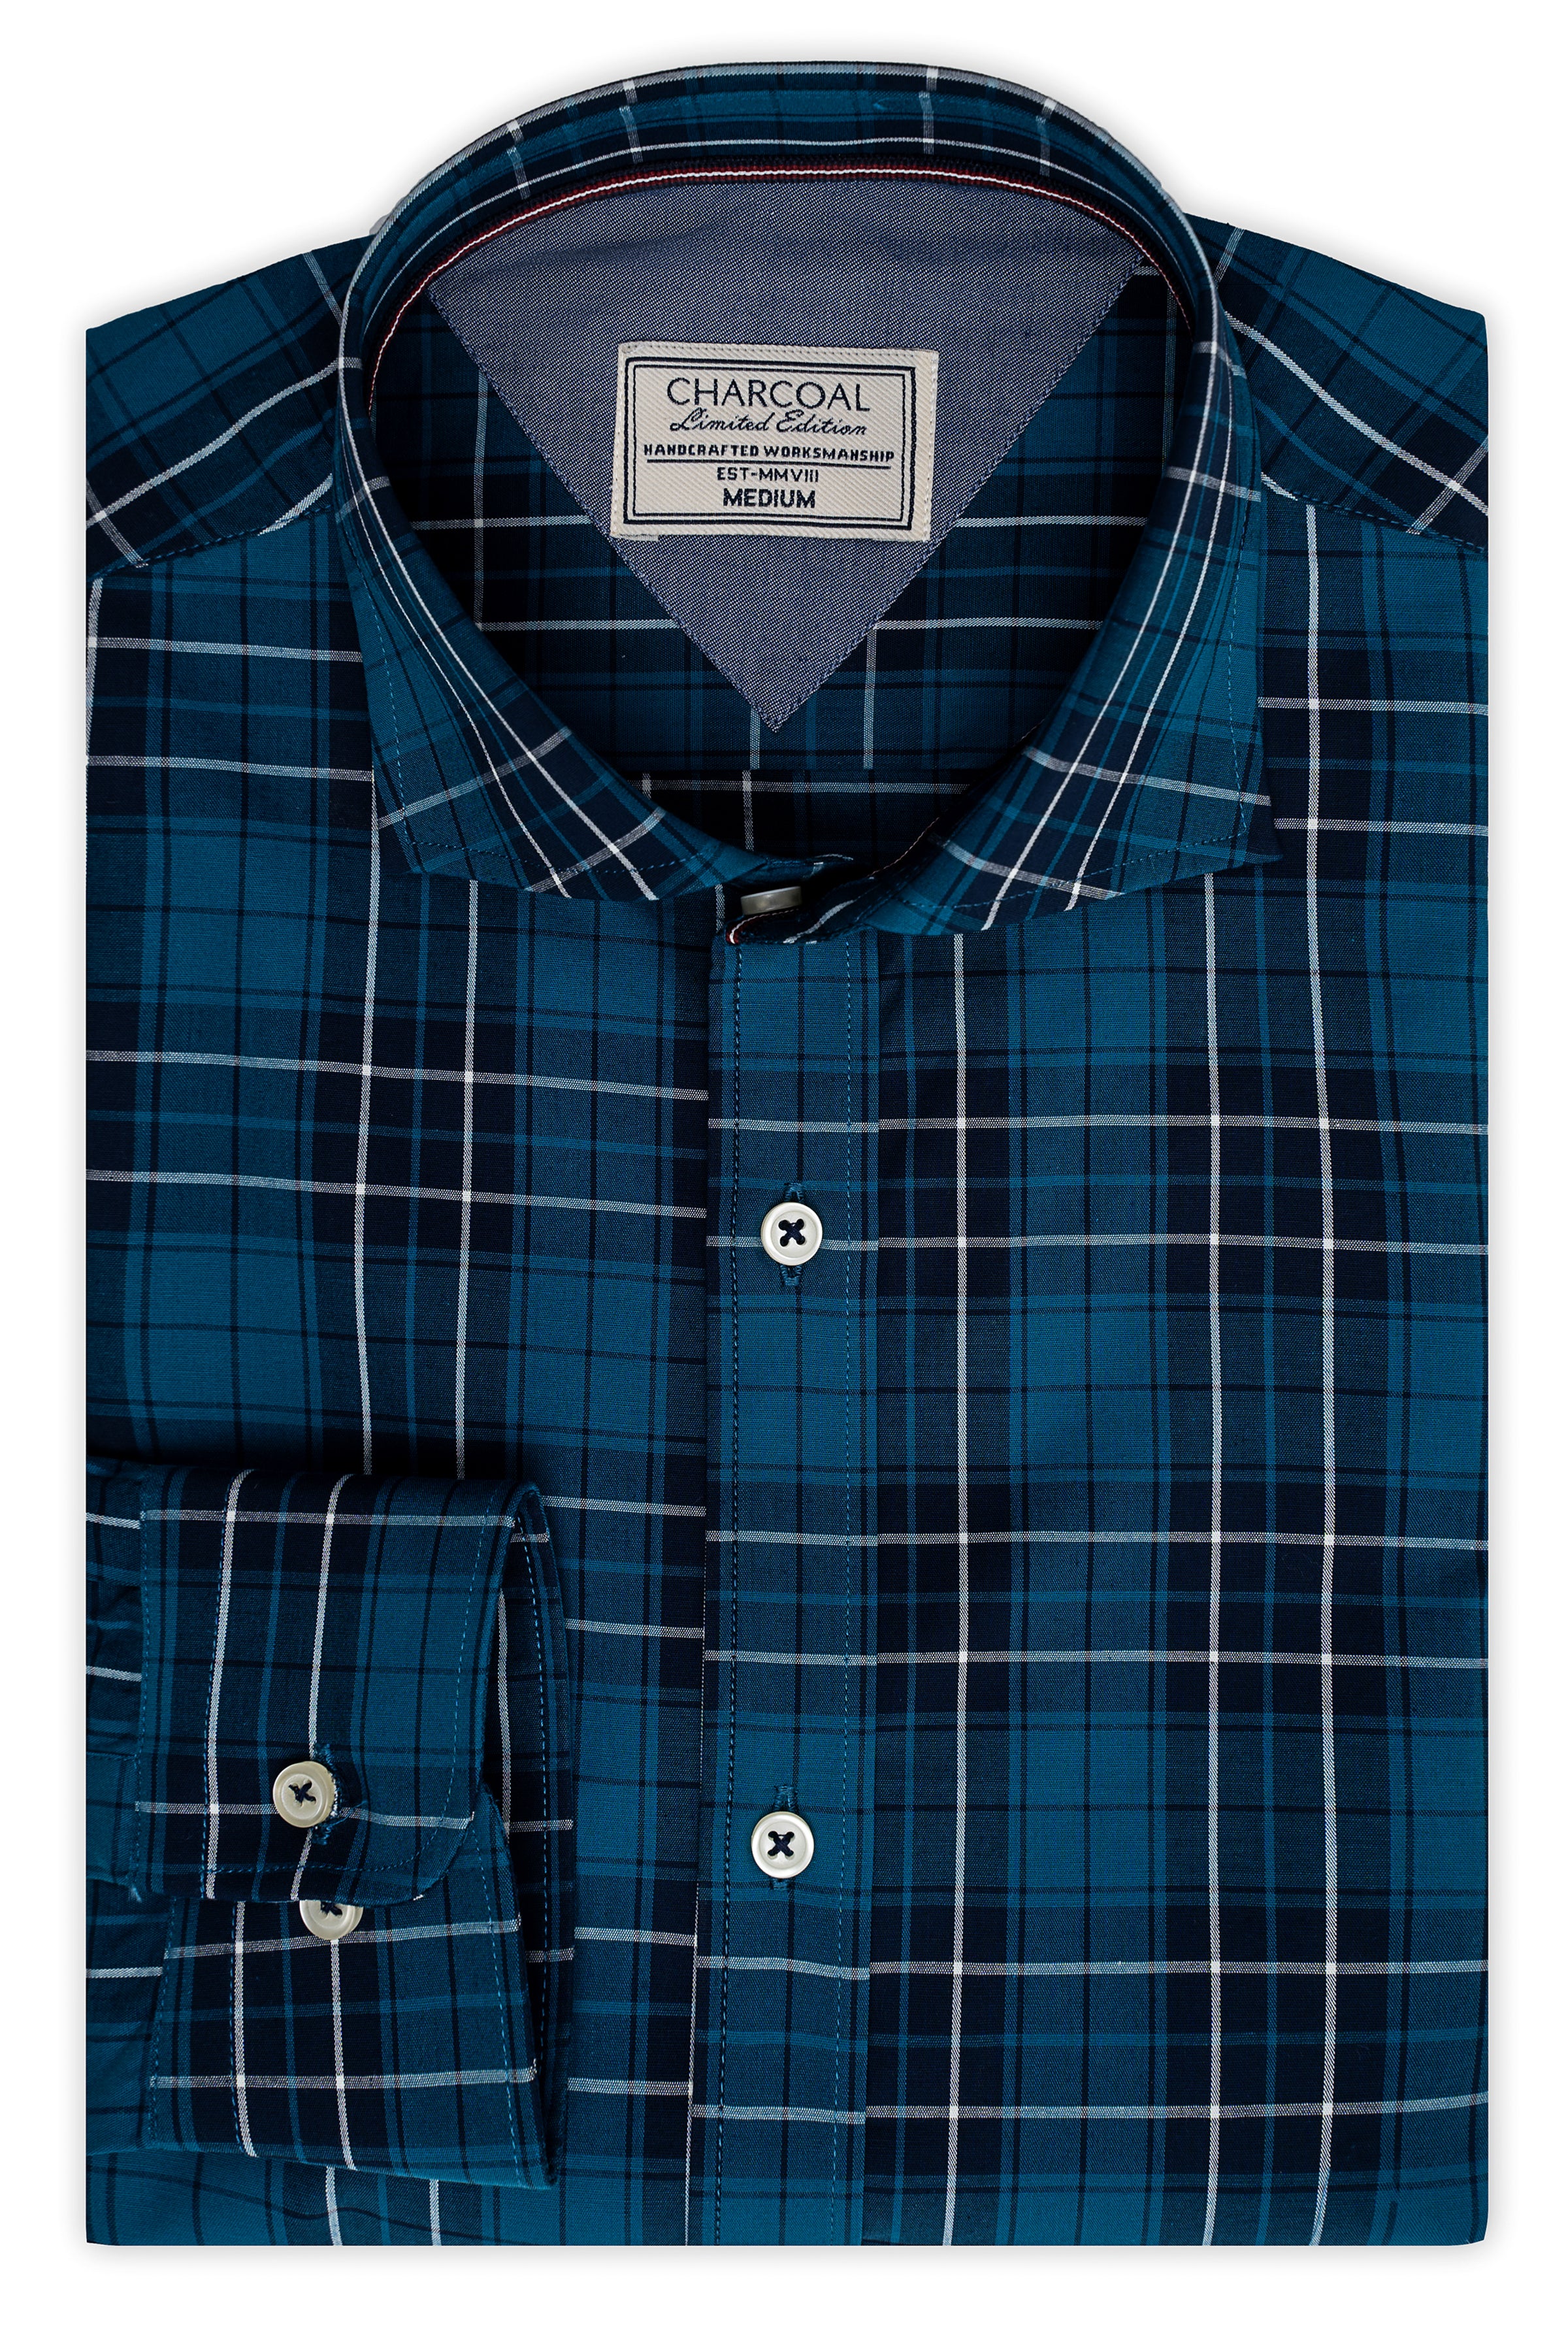 LIMITED EDITION SHIRTS BLUE CHECK